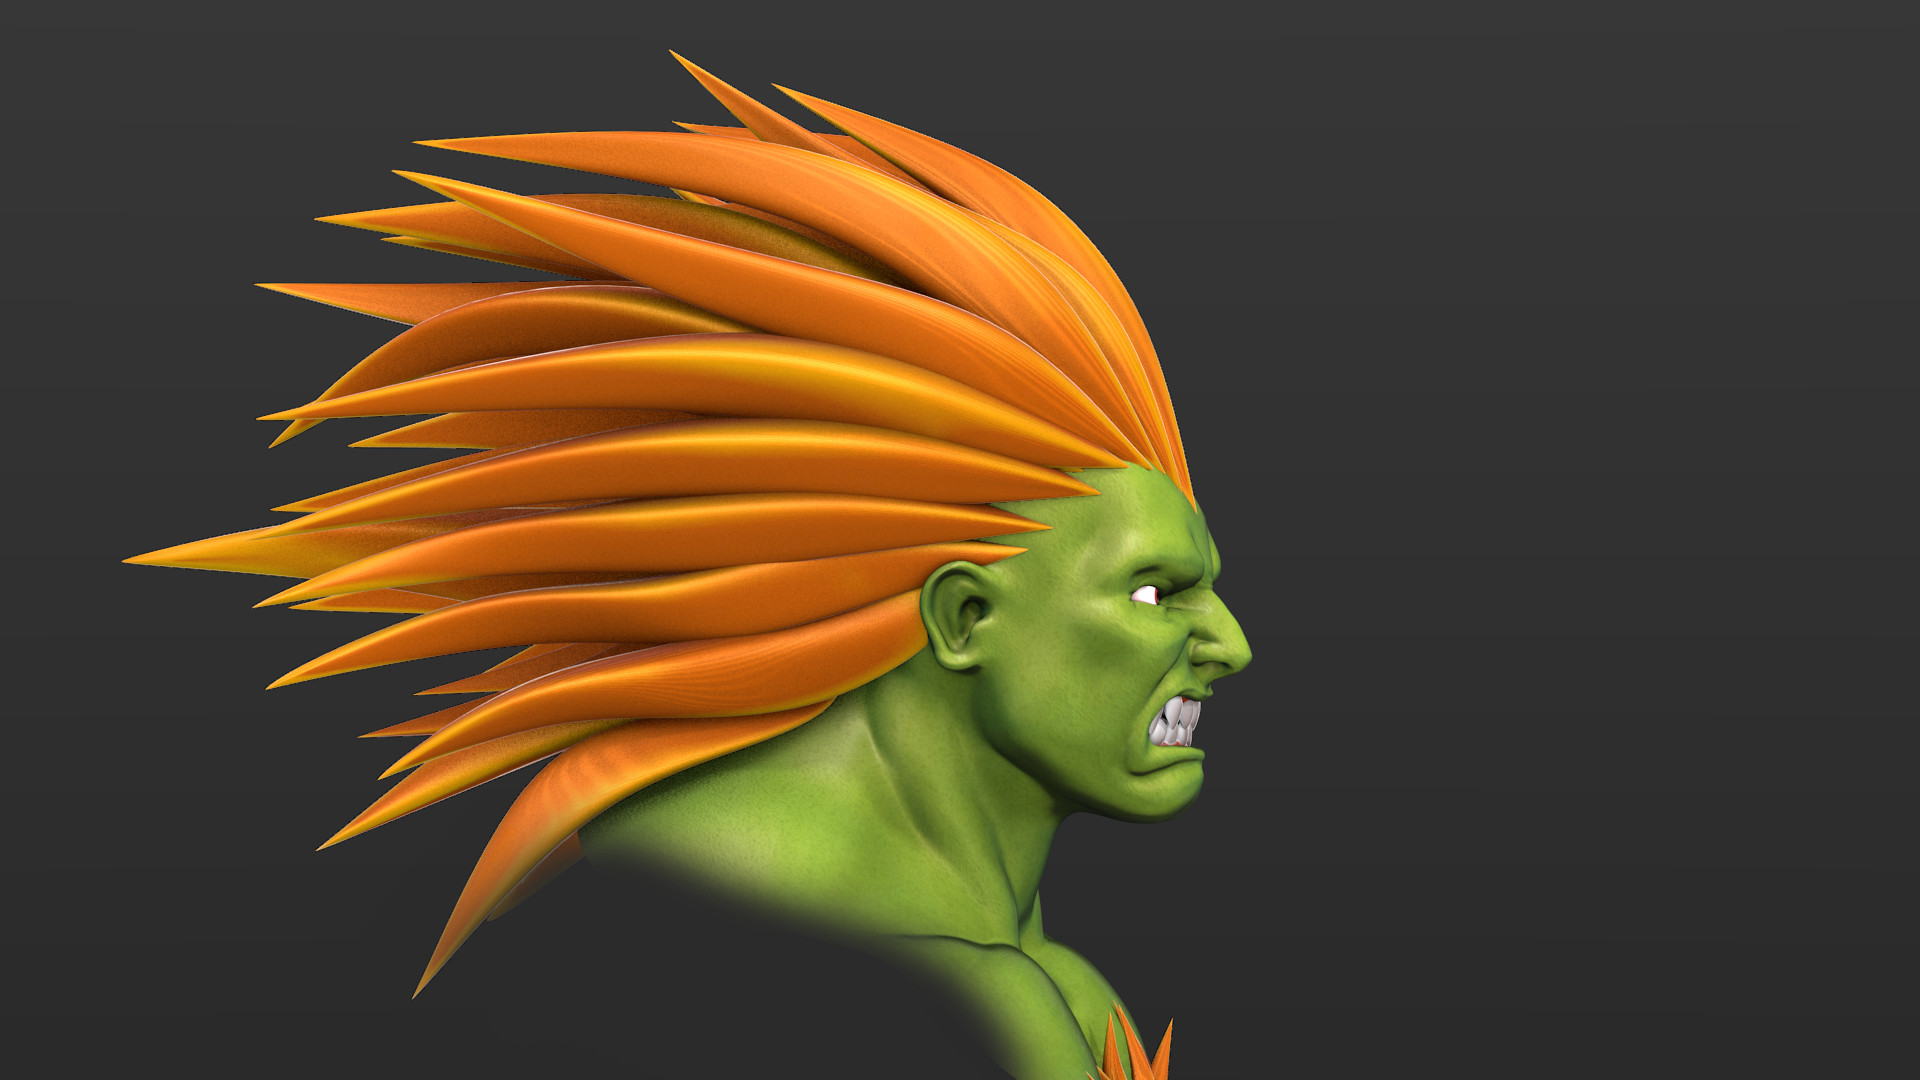 Blanka Character Concept Art, Images, Street Fighter II, Museum